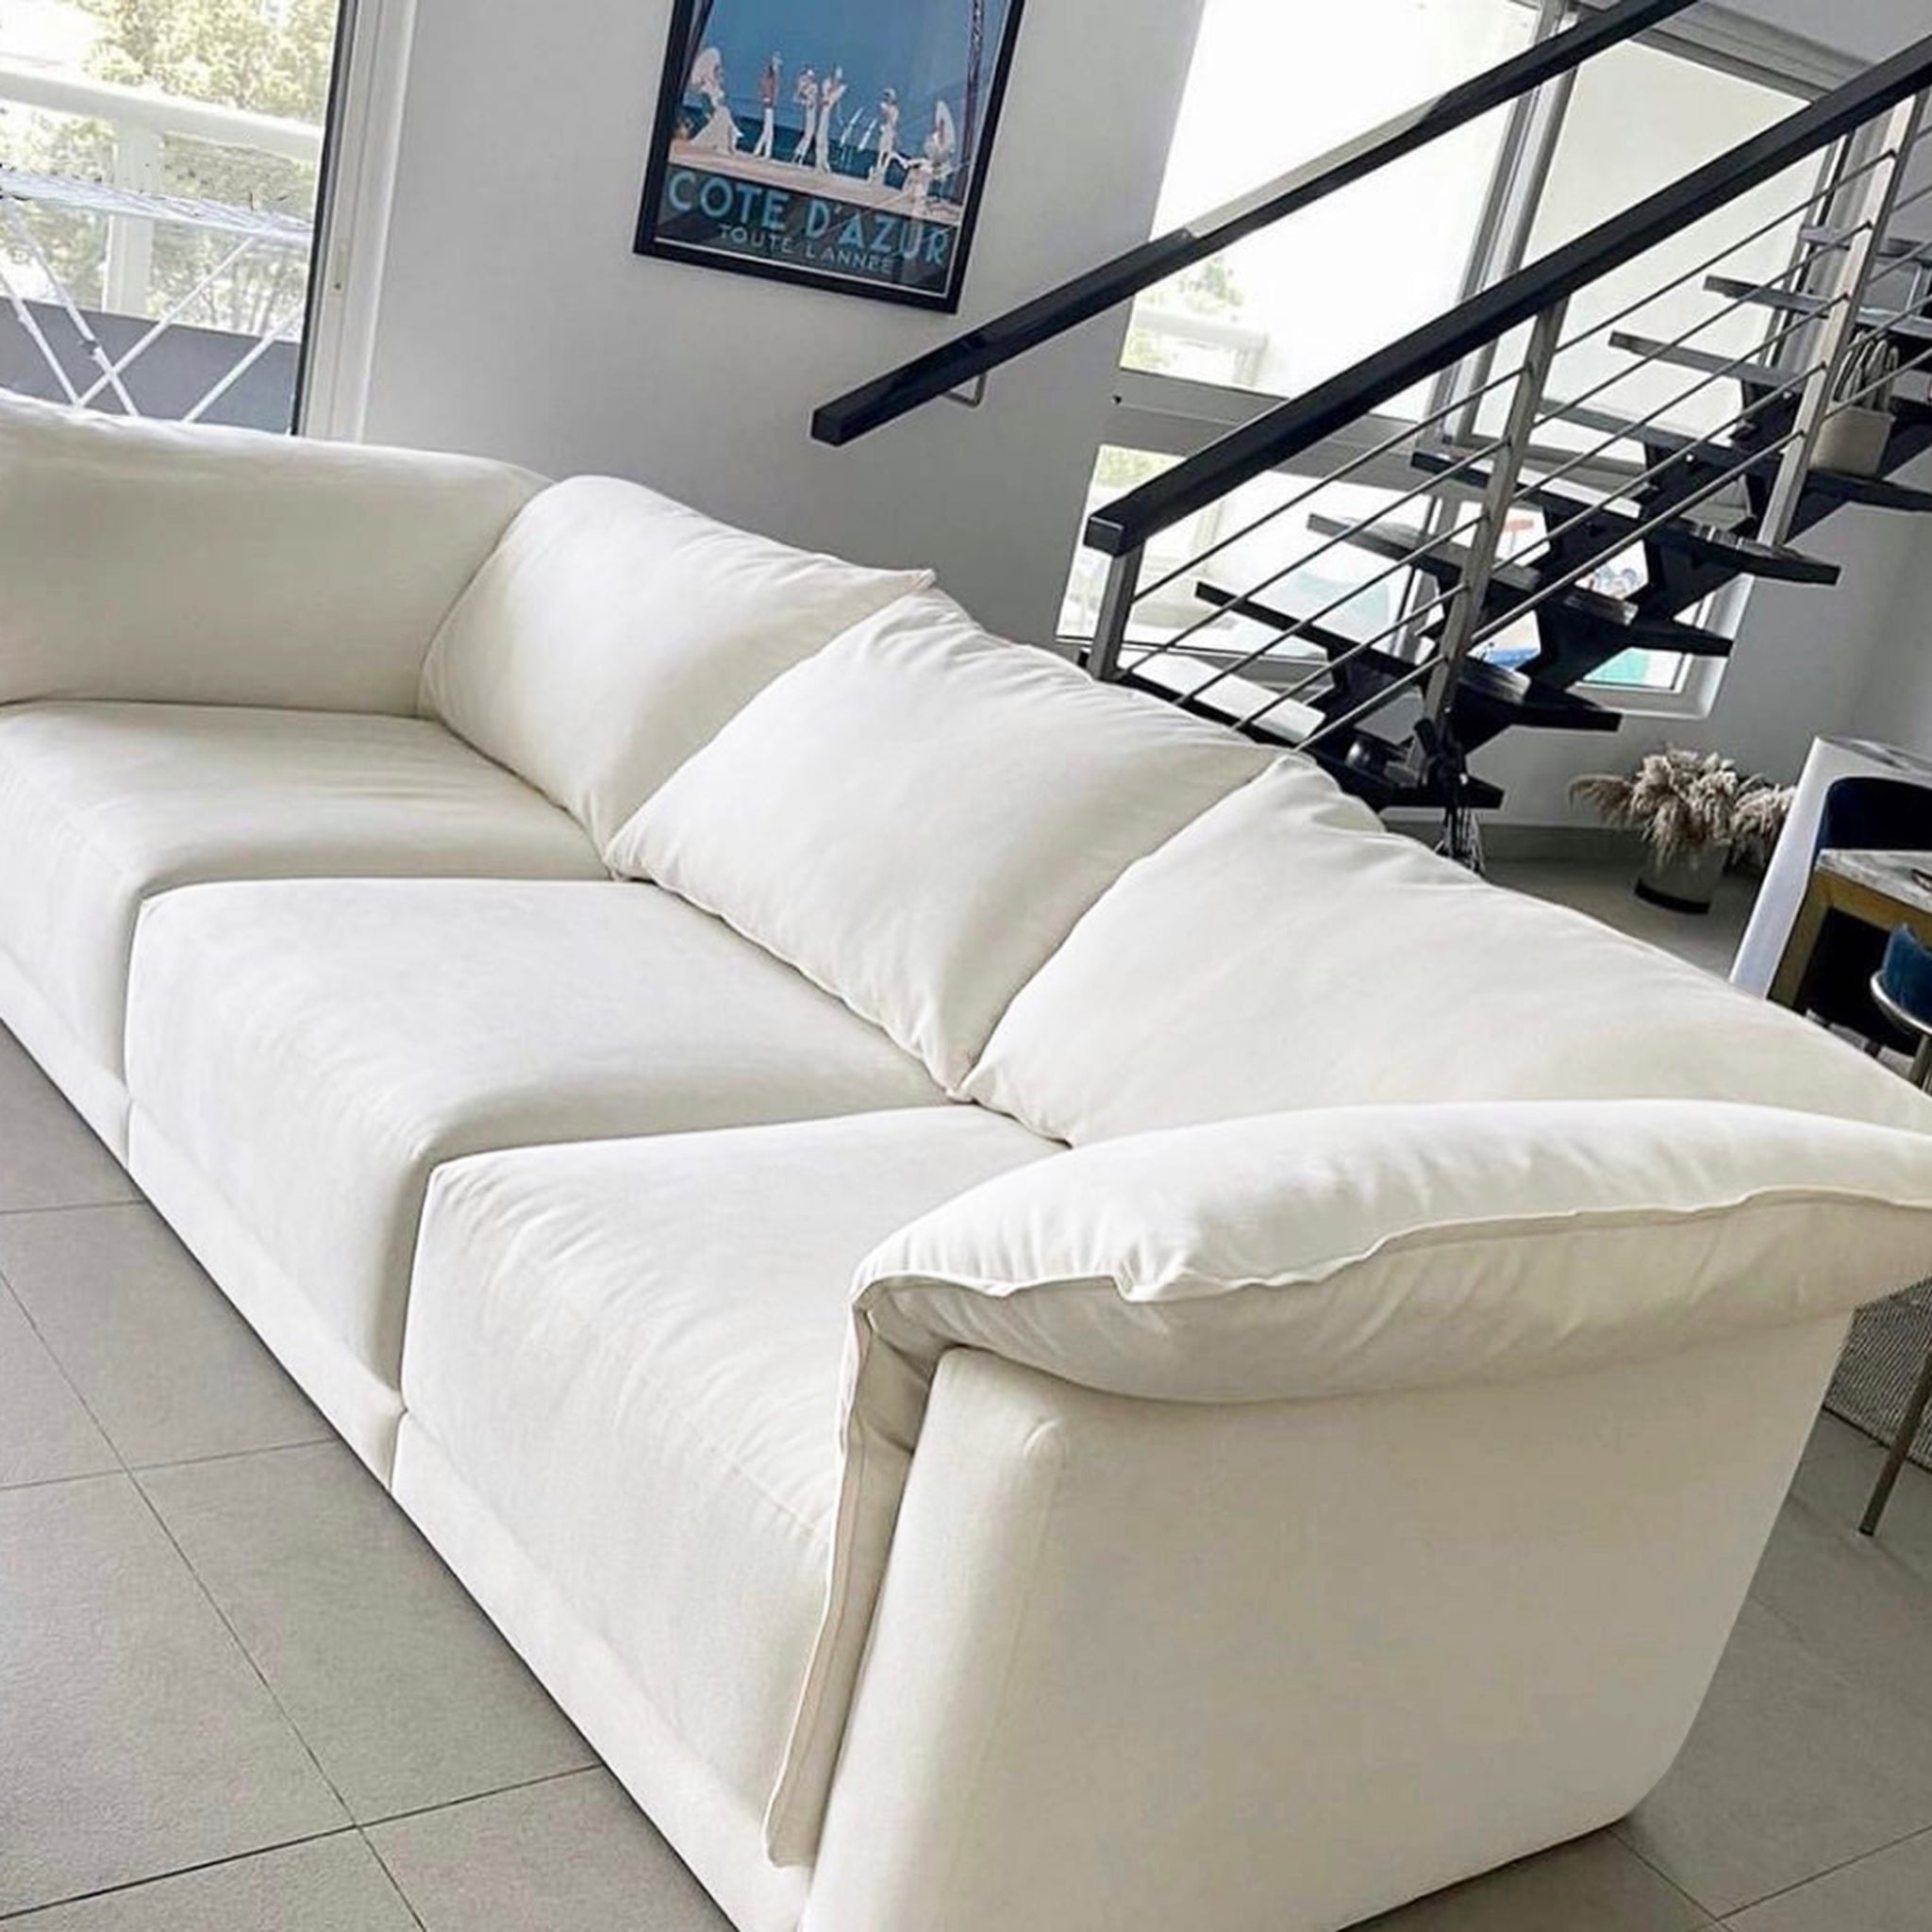 Luxurious white sofa in a modern living room with a sleek black staircase and large windows providing ample natural light.